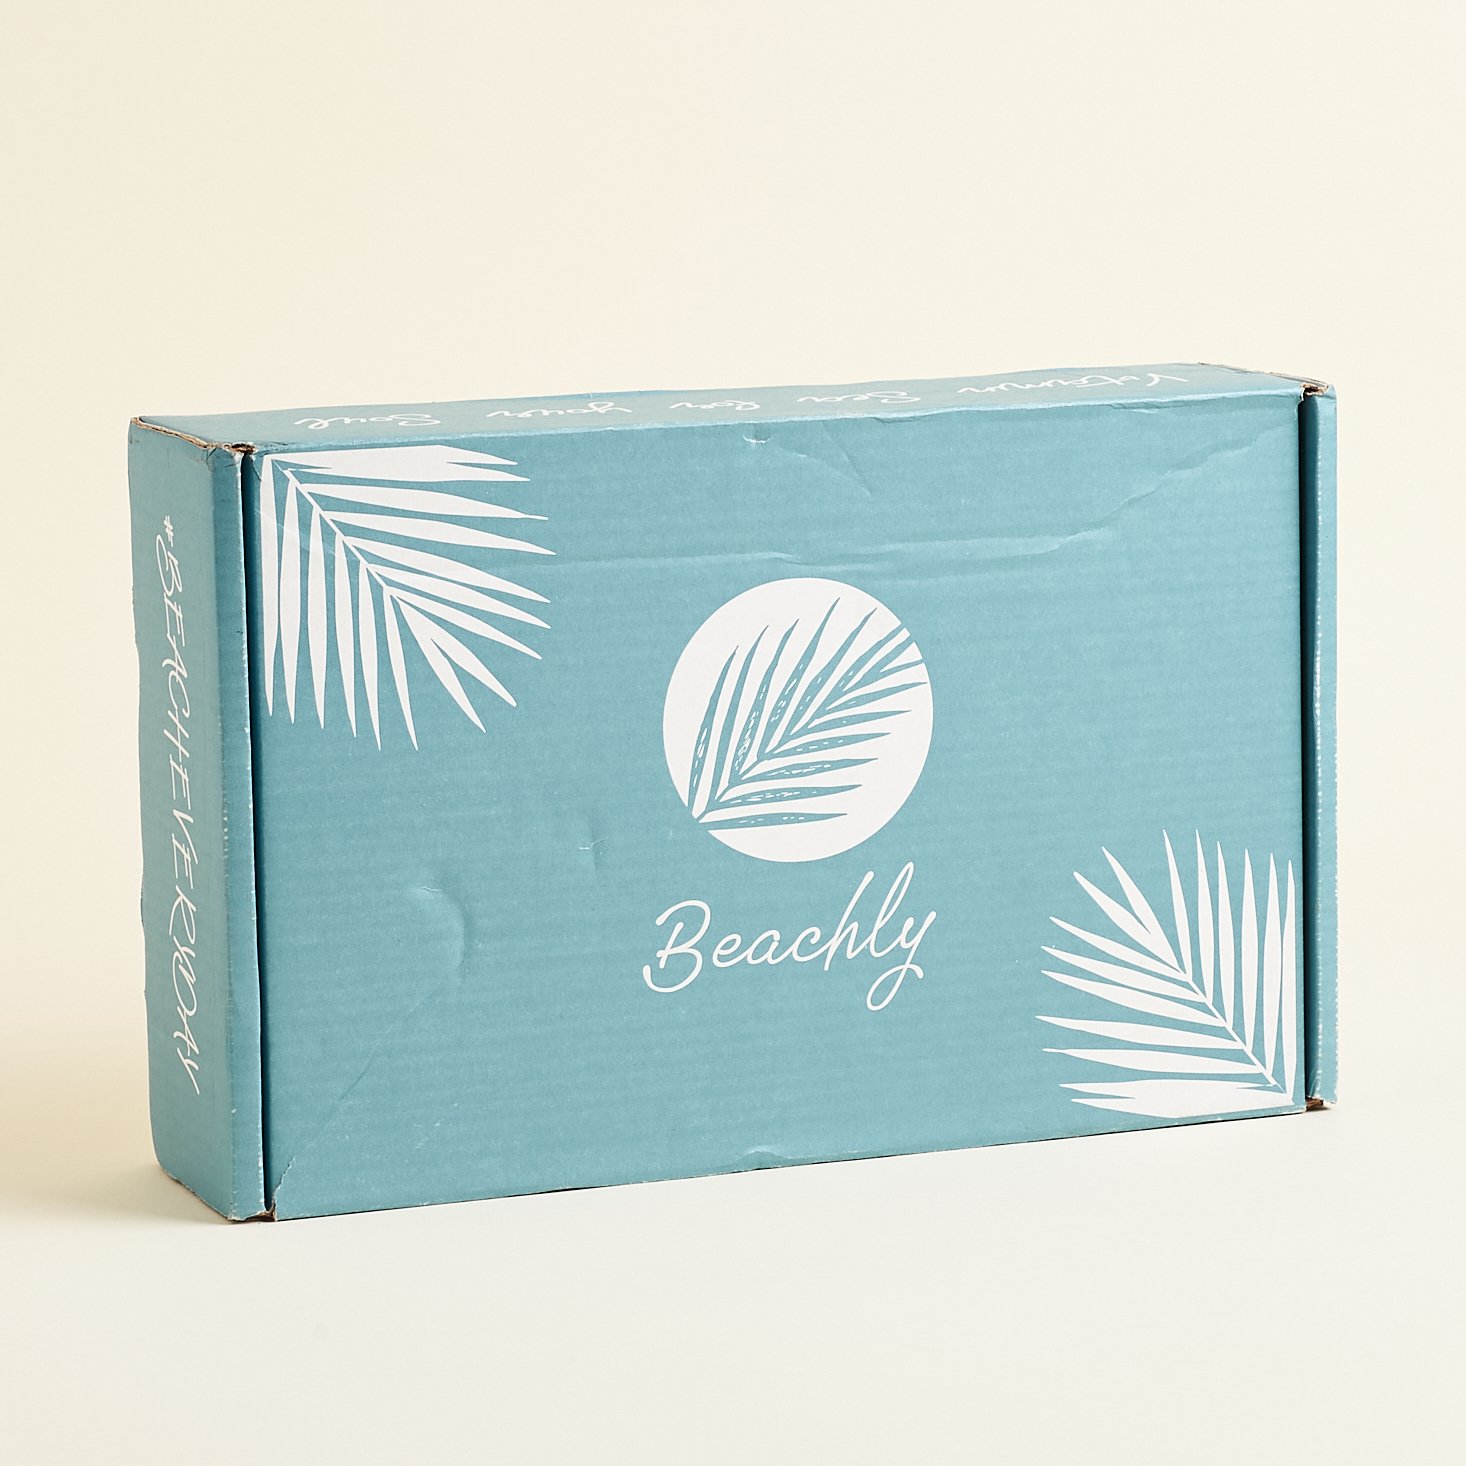 Beachly Coupon – $30 Off Your First Box!